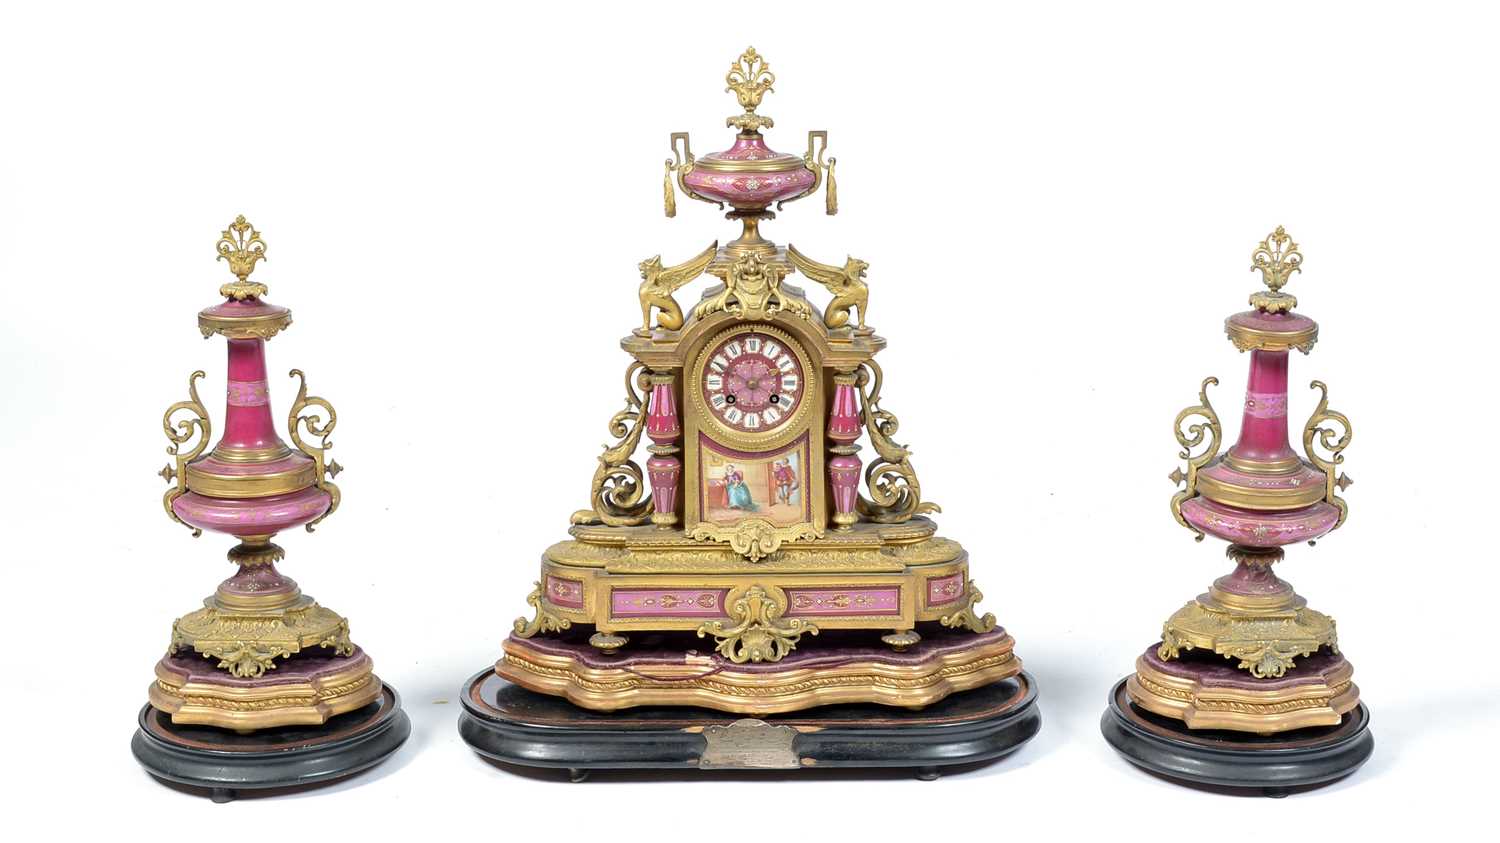 1256 - Japy Freres, A late 19th Century French gilt metal & pink garniture  mantel clock